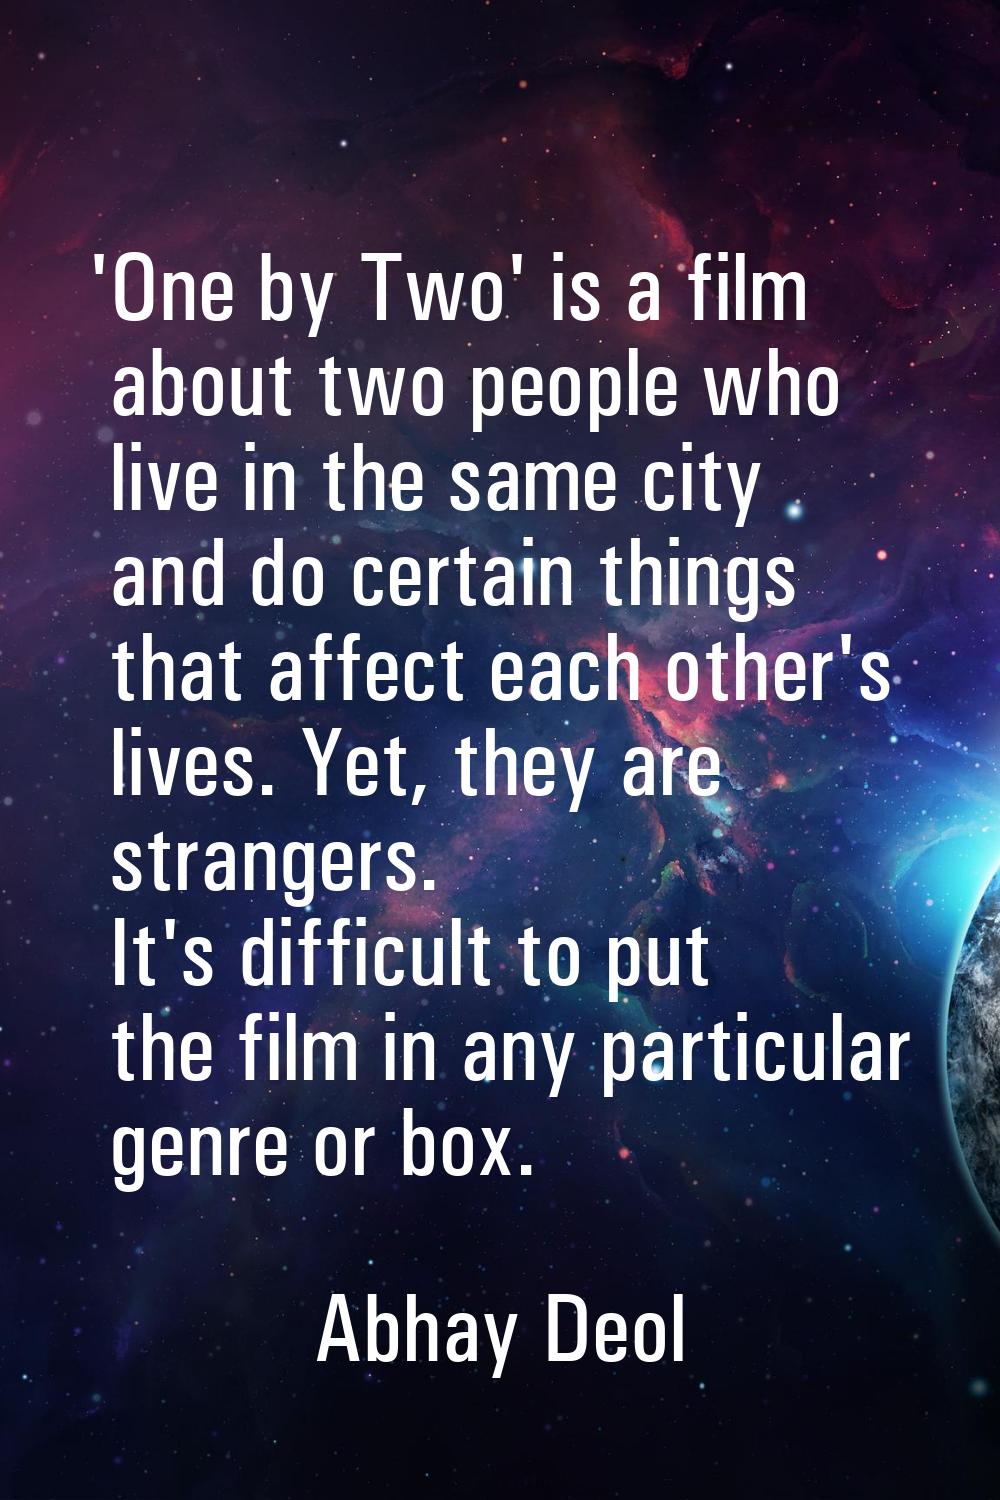 'One by Two' is a film about two people who live in the same city and do certain things that affect